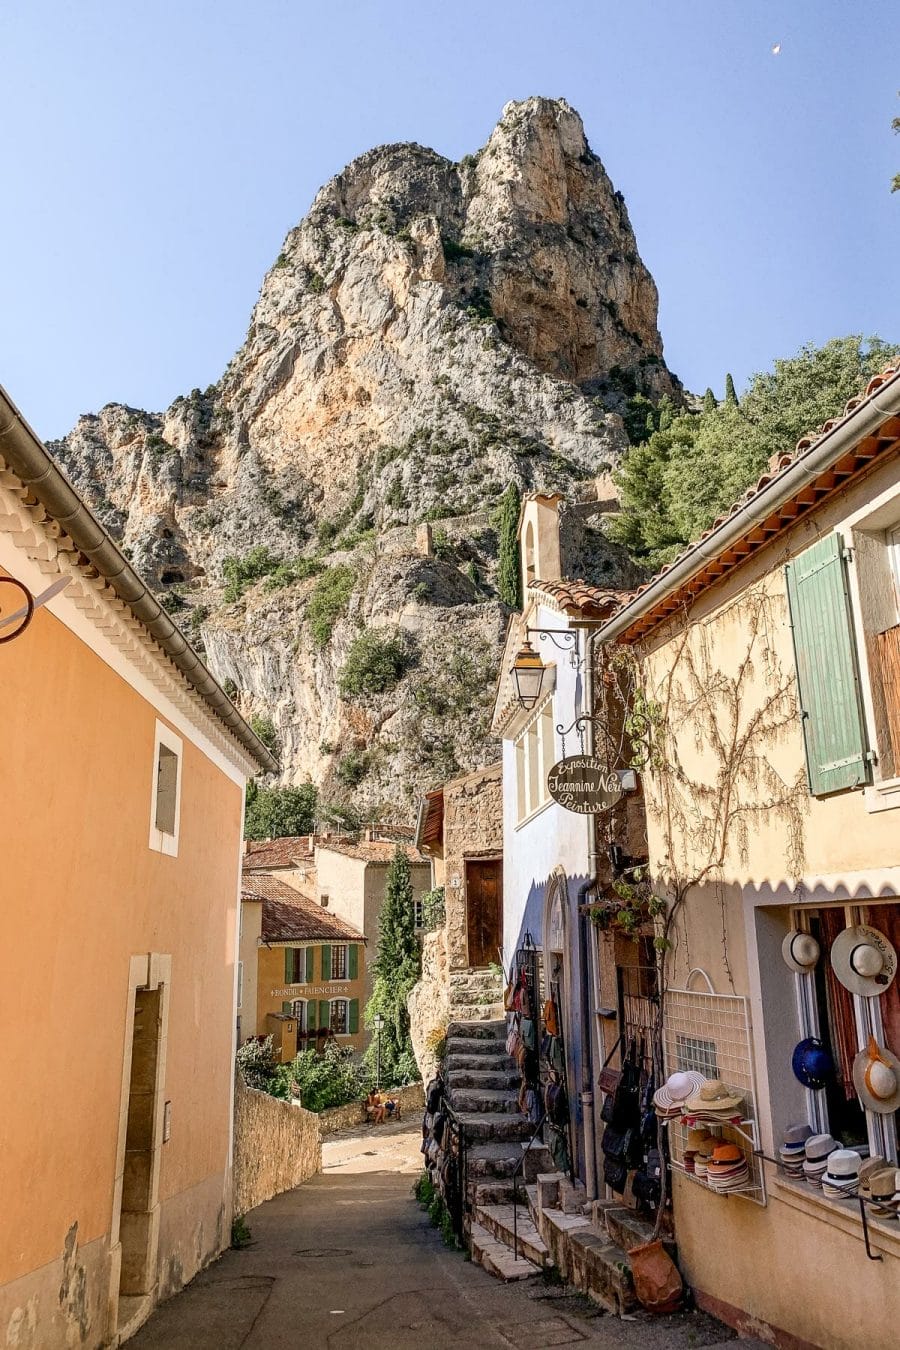 The charming town of Moustiers-Sainte-Marie in Provence